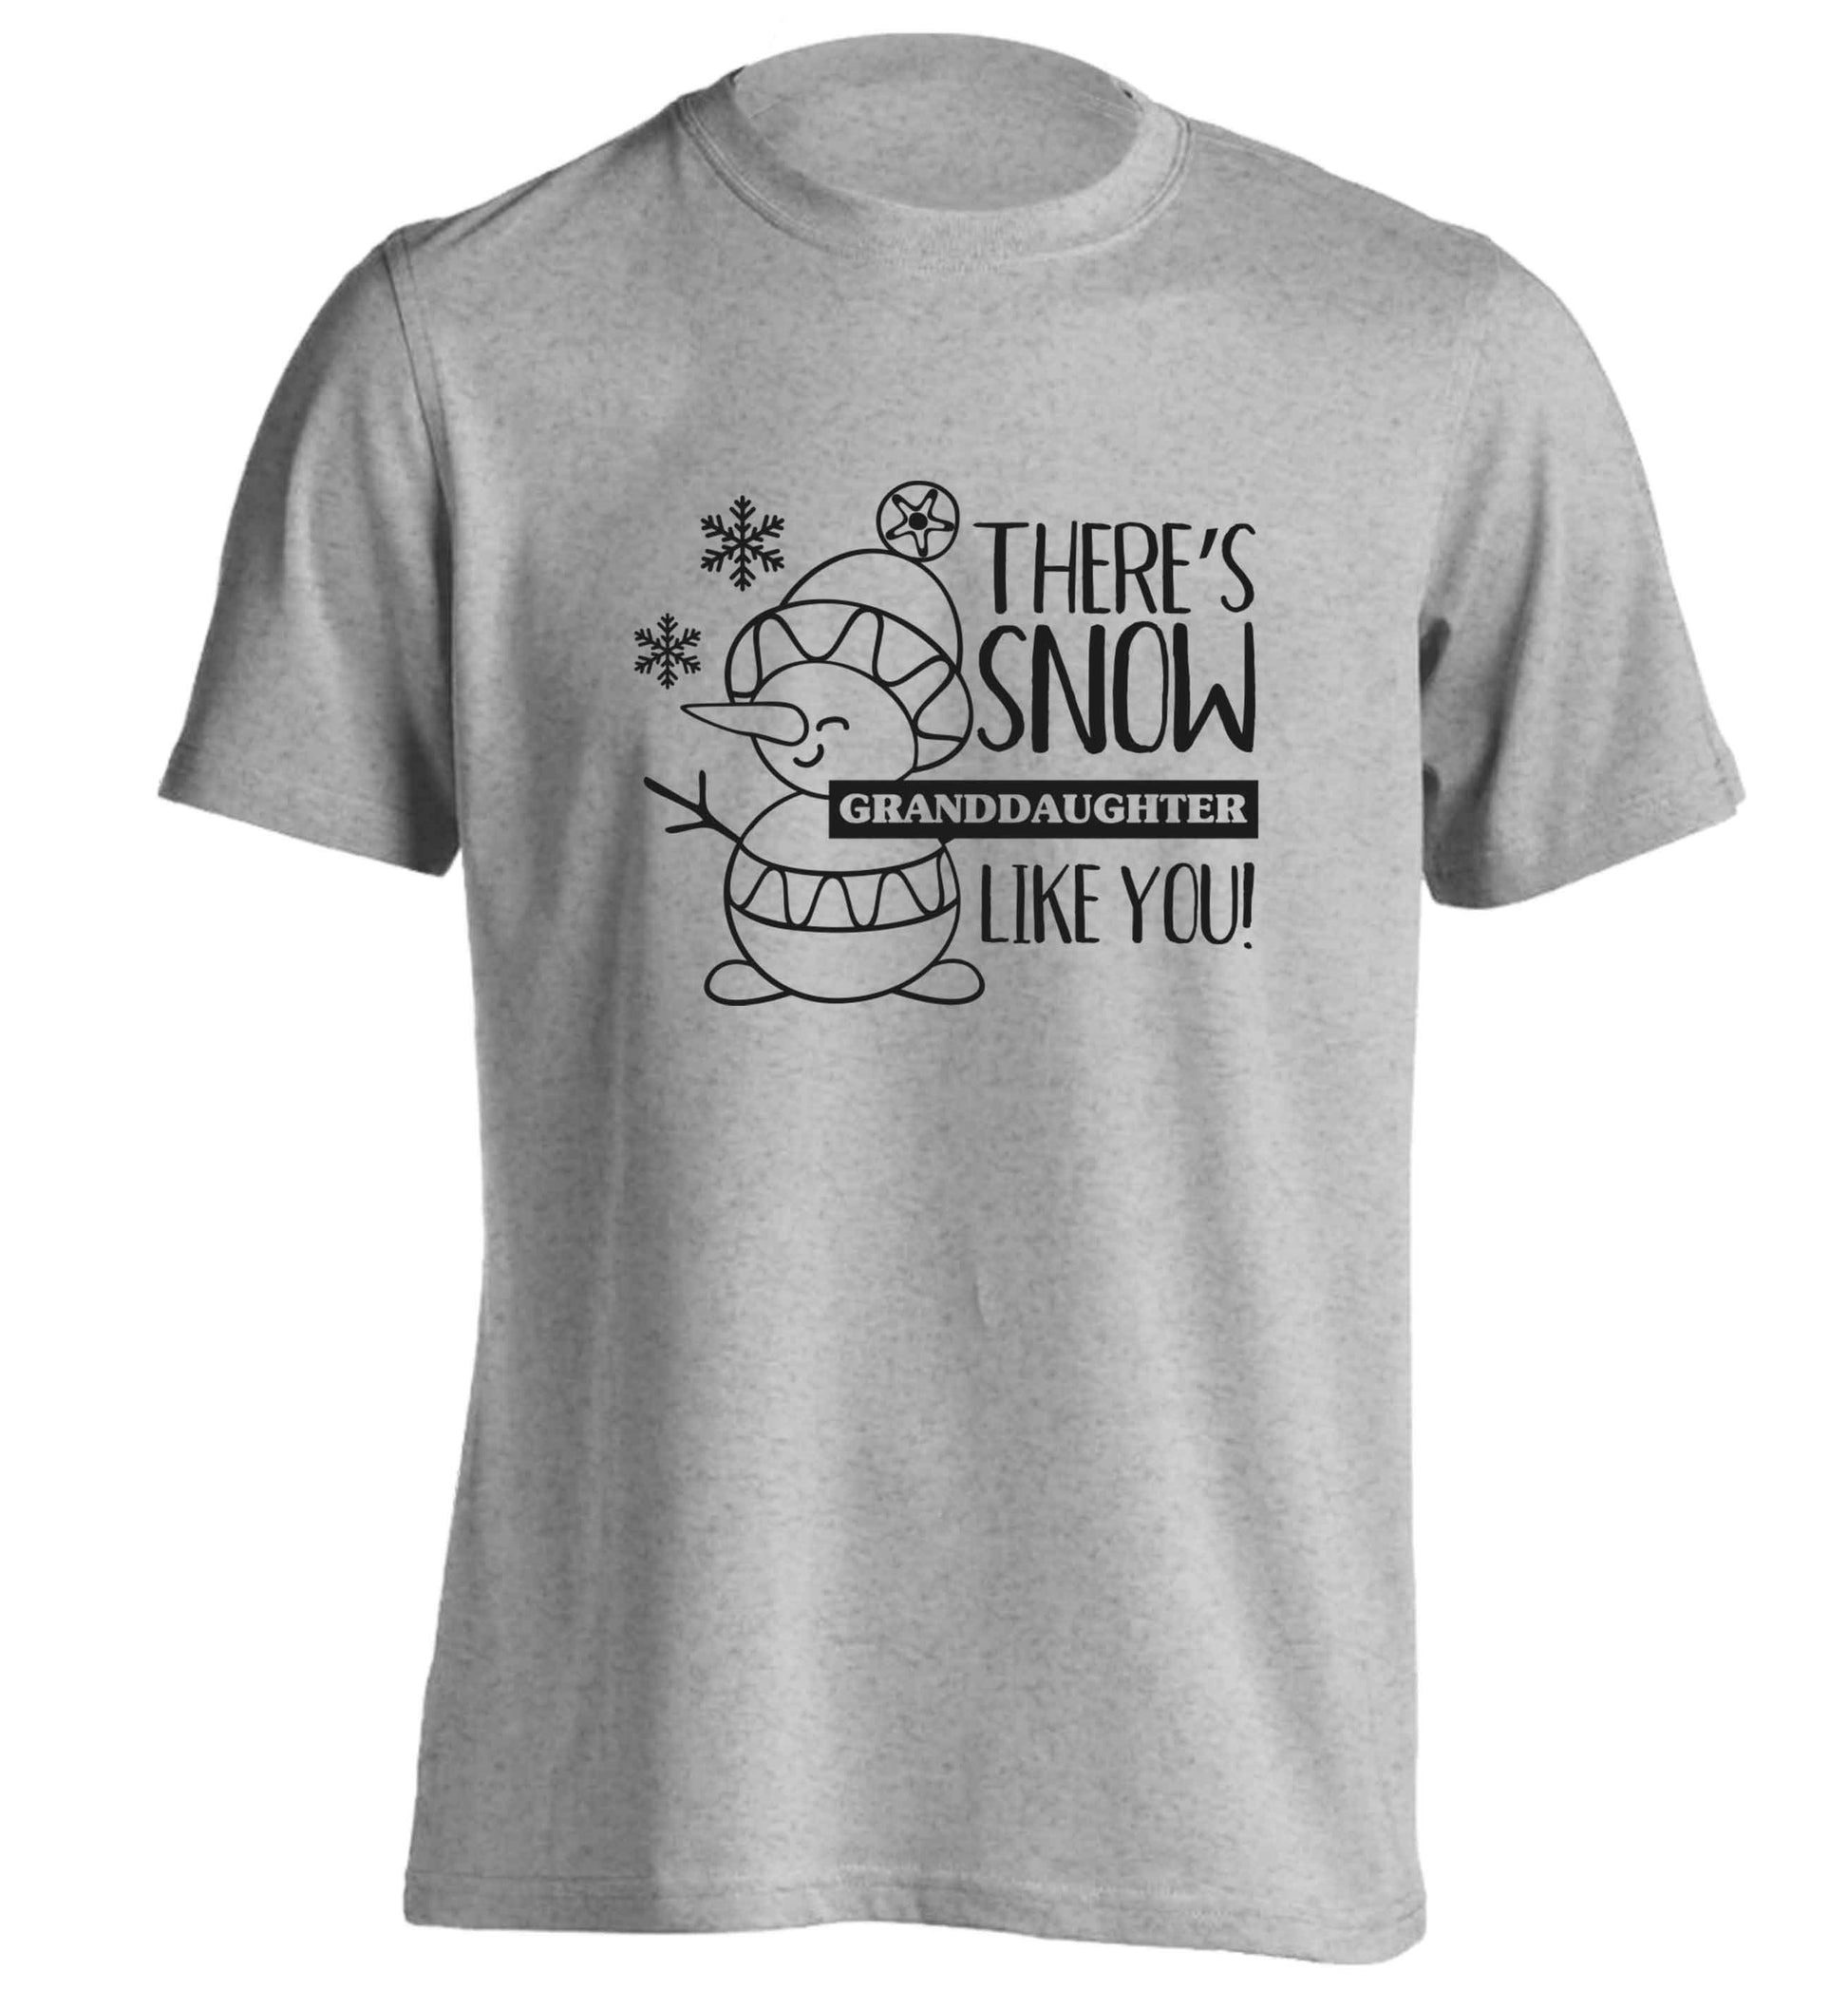 There's snow granddaughter like you adults unisex grey Tshirt 2XL